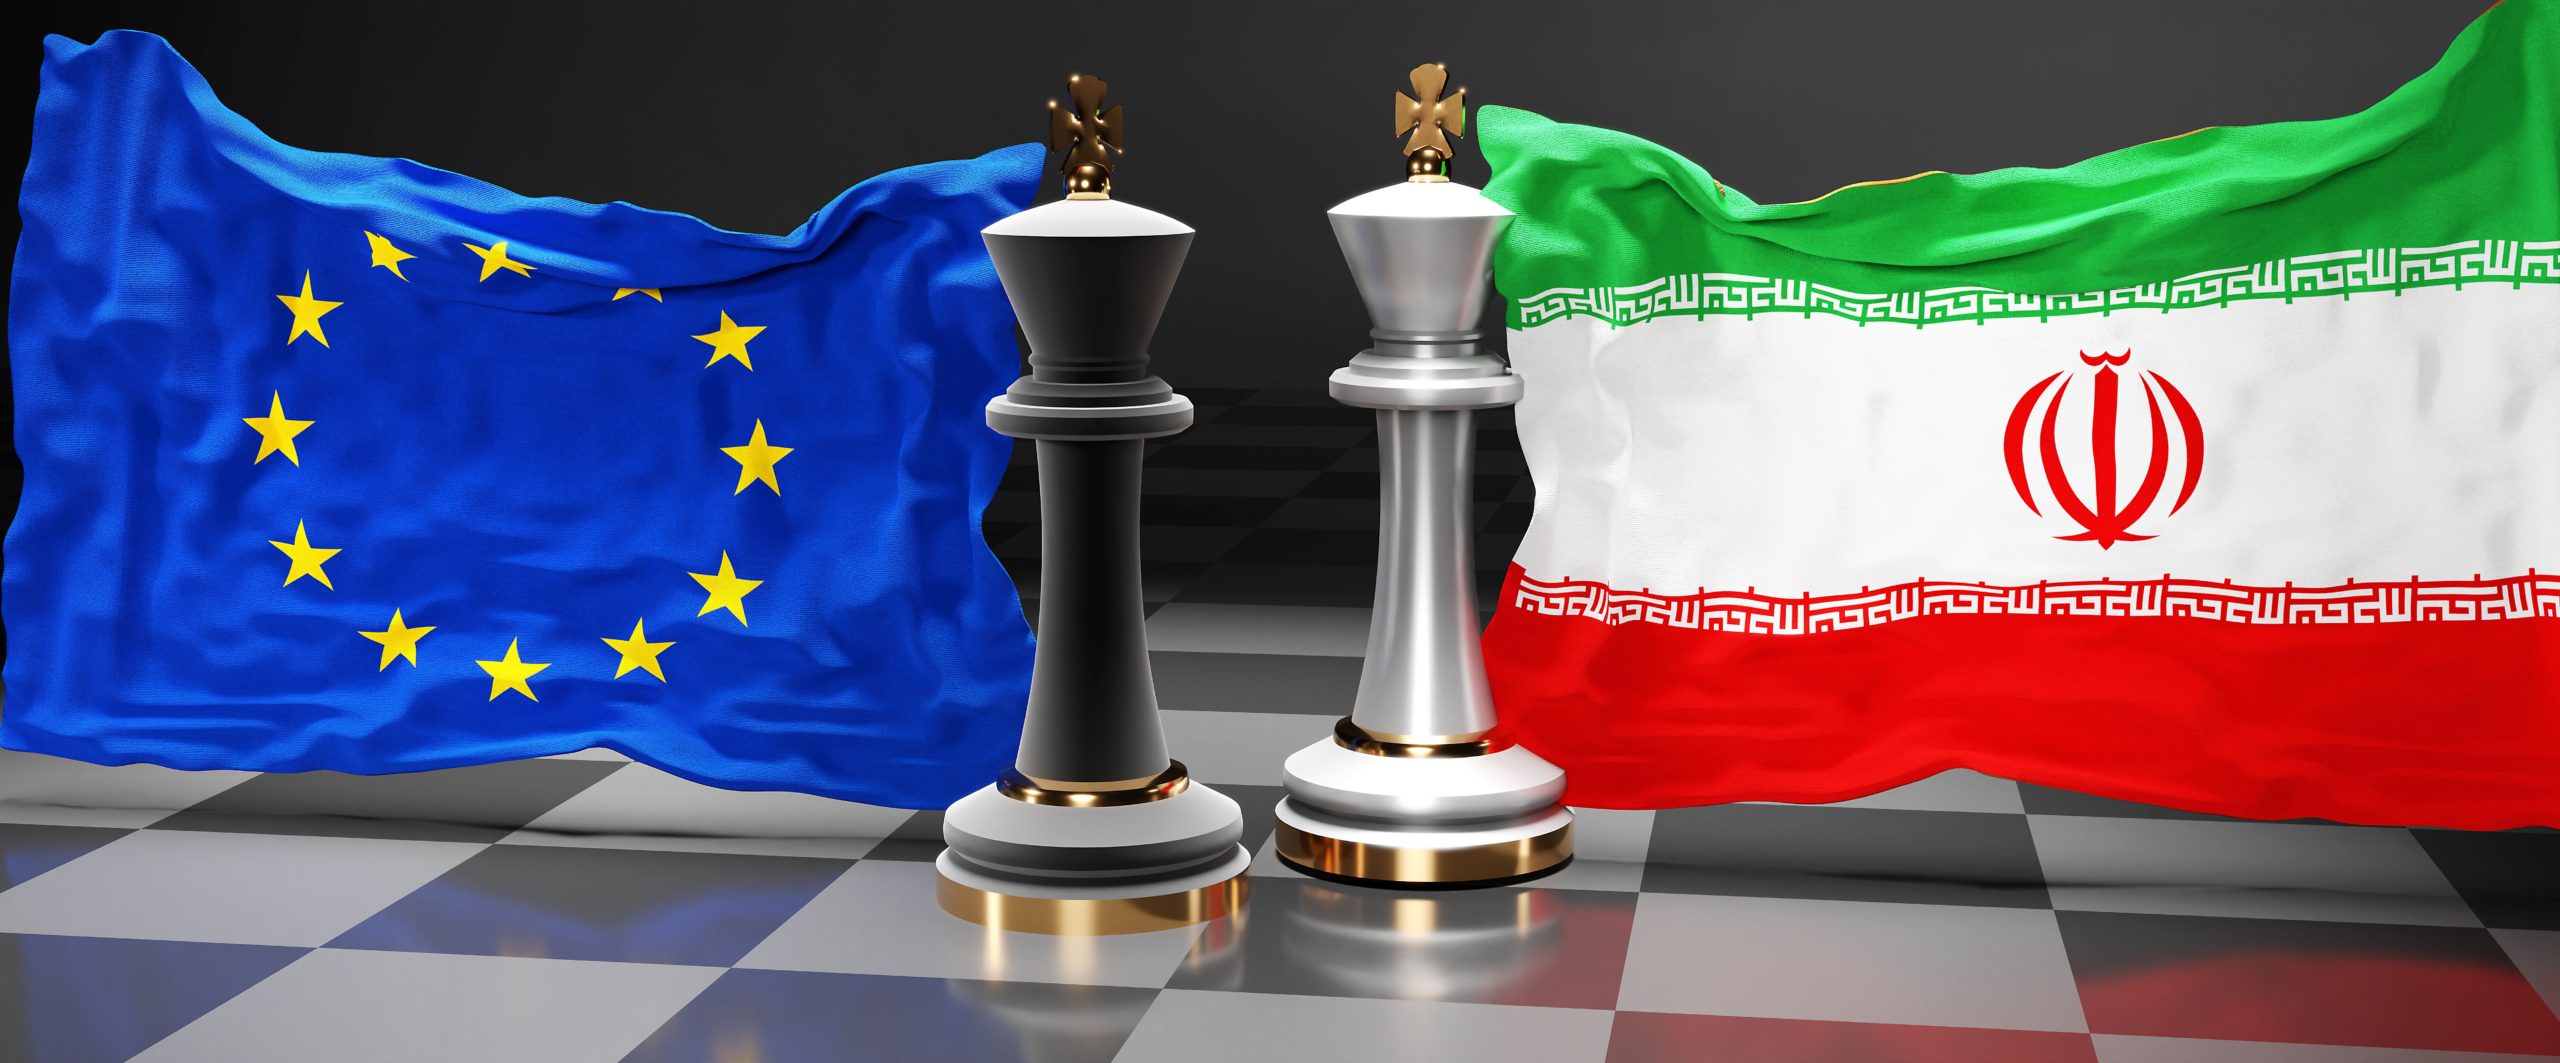 Iran policy: “Europe should not follow the Americans”